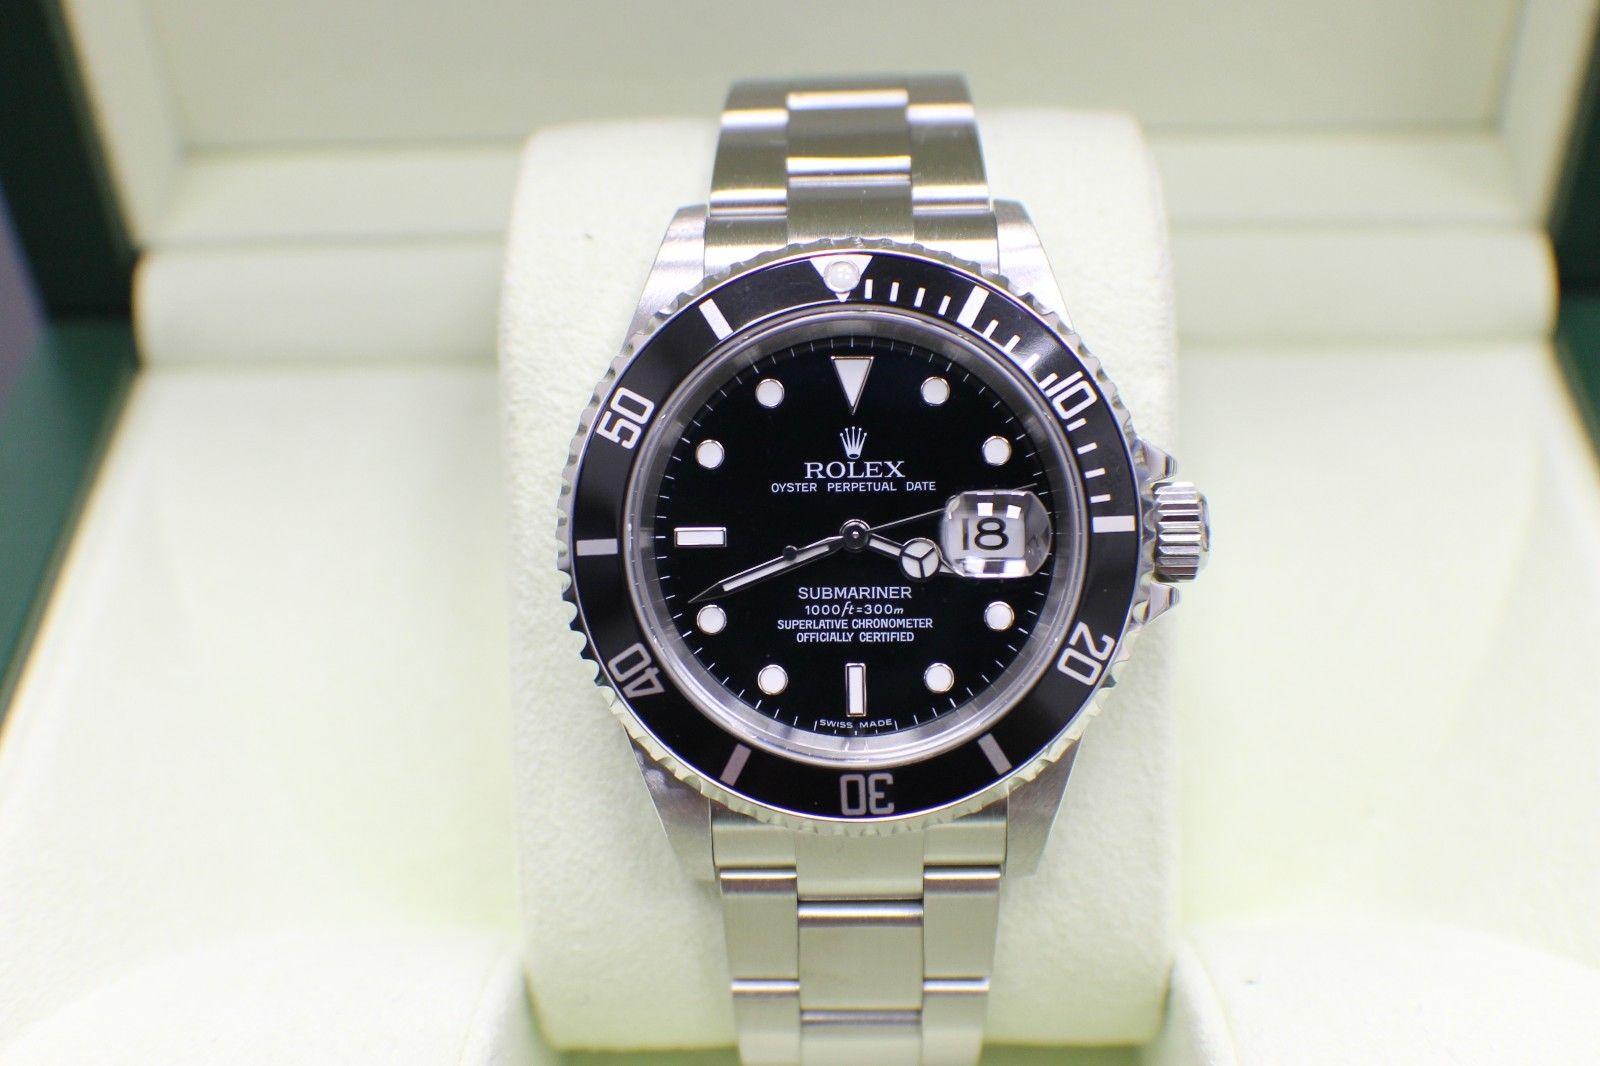 Style Number: 16610
Serial: Z02***
Year: 2007
Model: Submariner
Case Material: Stainless Steel 
Band: Stainless Steel
Bezel: Black
Dial: Black
Face: Sapphire Crystal 
Case Size: 40mm
Includes: 
-Rolex Box & Papers
-Certified Appraisal 
-6 Month